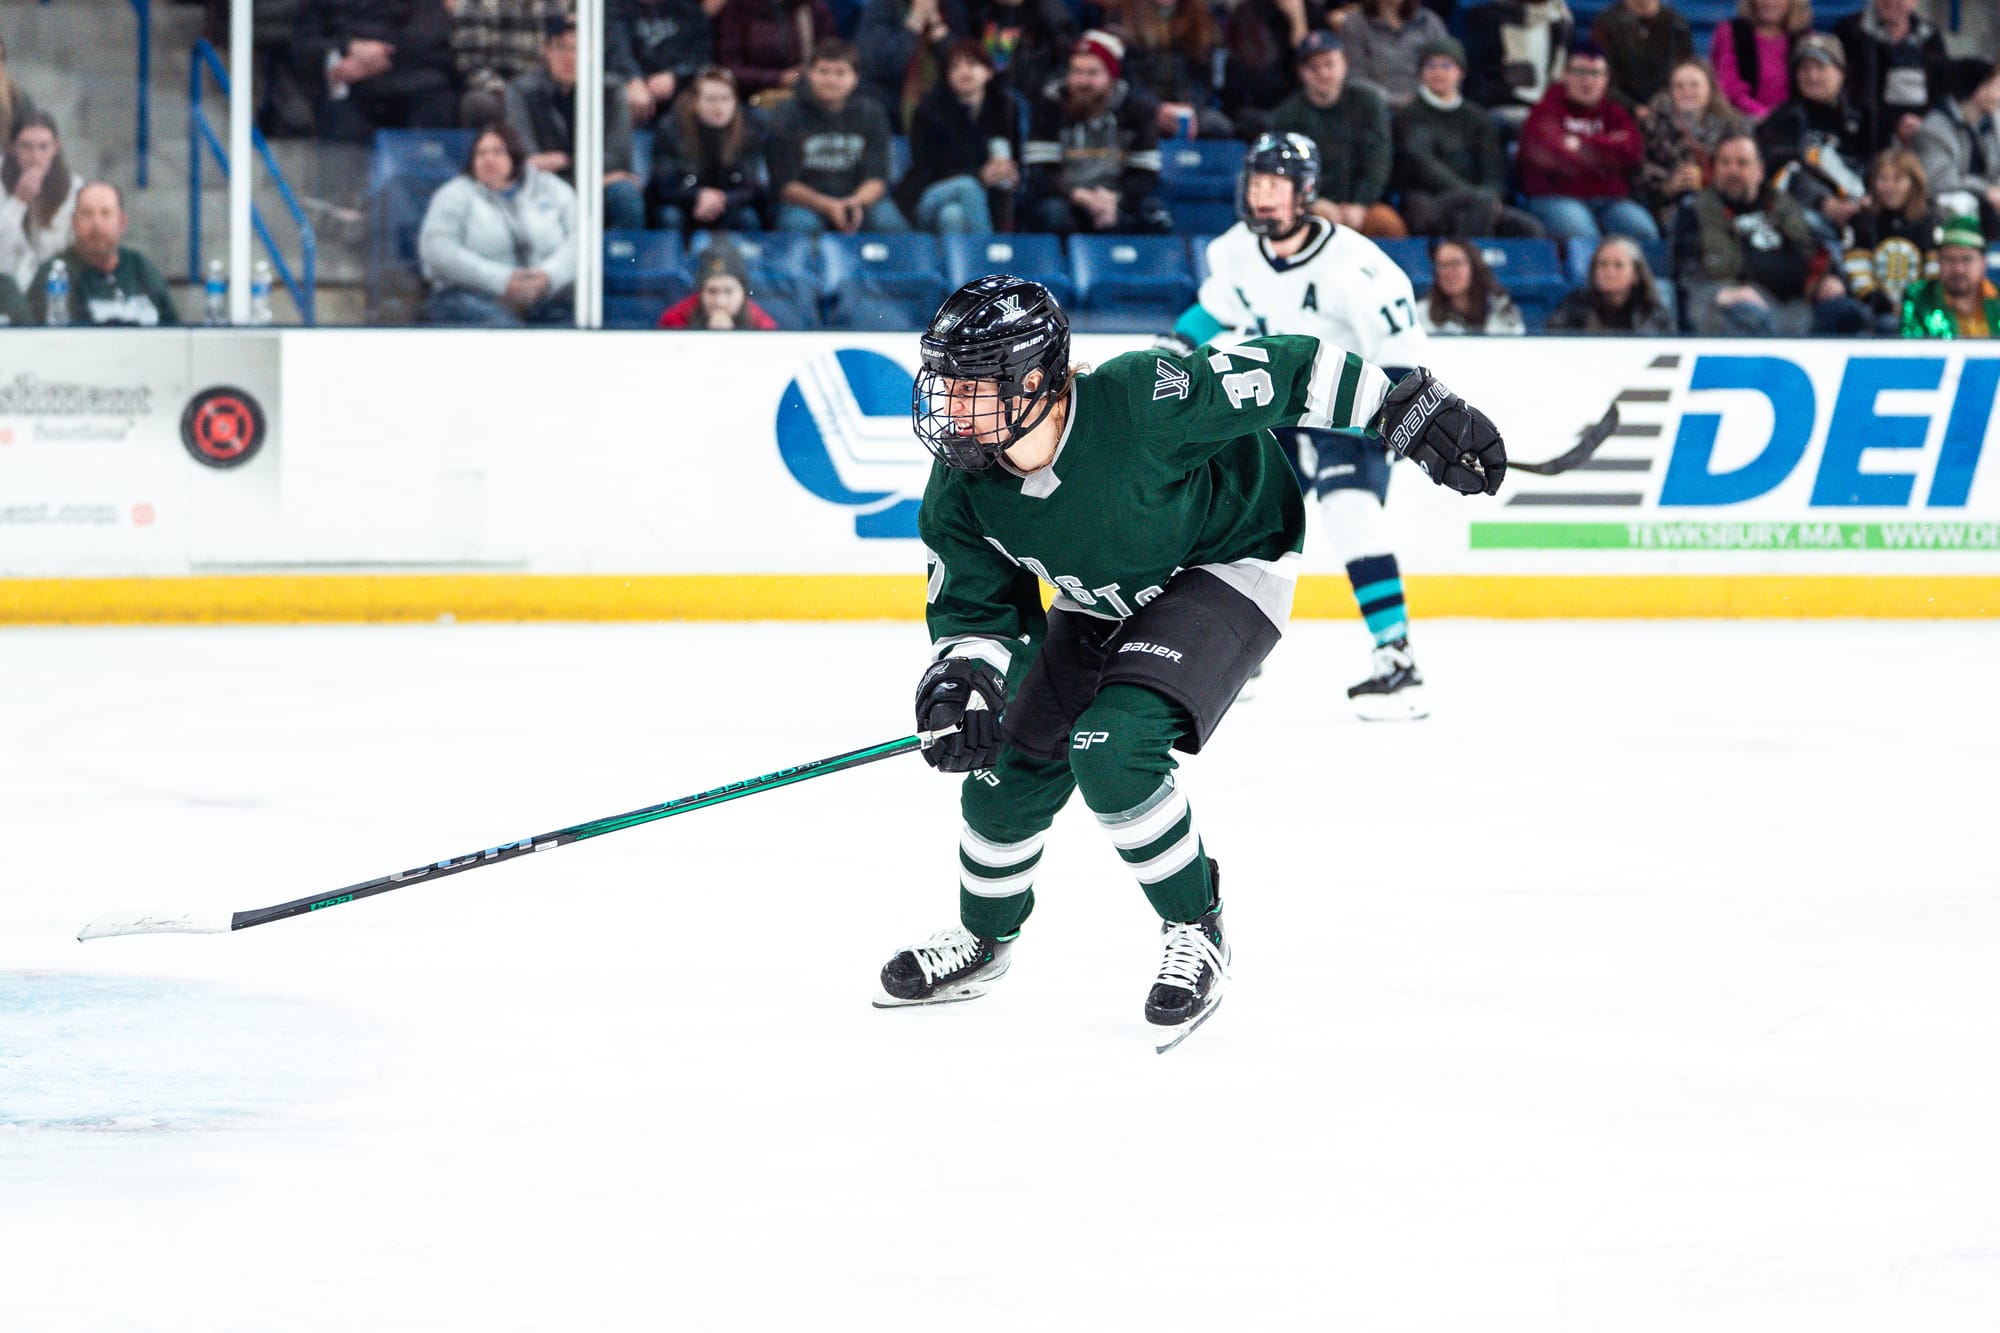 Theresa Schafzahl, wearing a green home uniform, hunts the puck during a game.